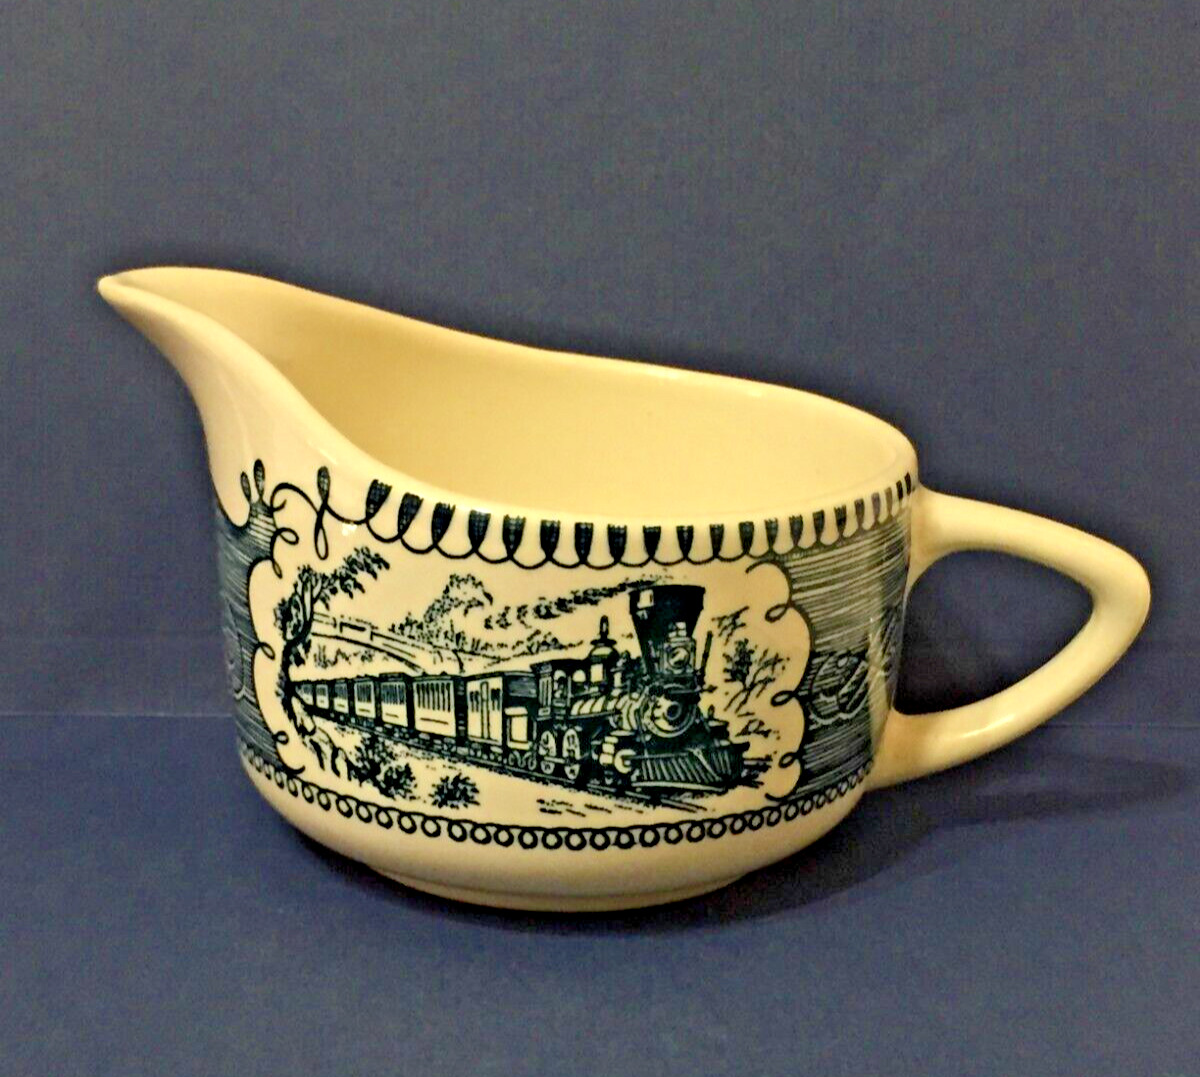 Vintage Blue and White Currier & Ives Creamer with Train Locomotive Design